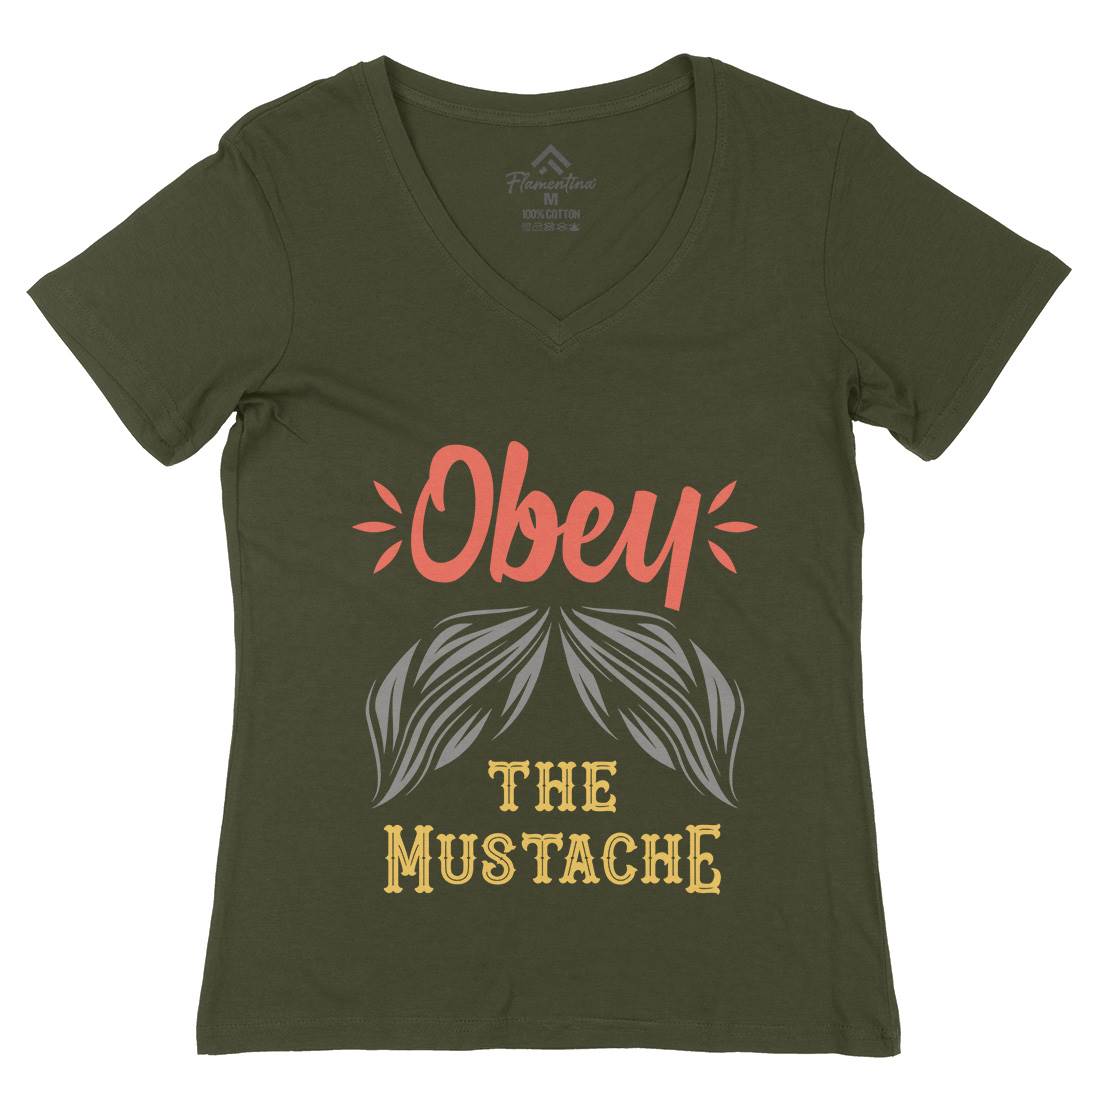 Obey The Moustache Womens Organic V-Neck T-Shirt Barber C802